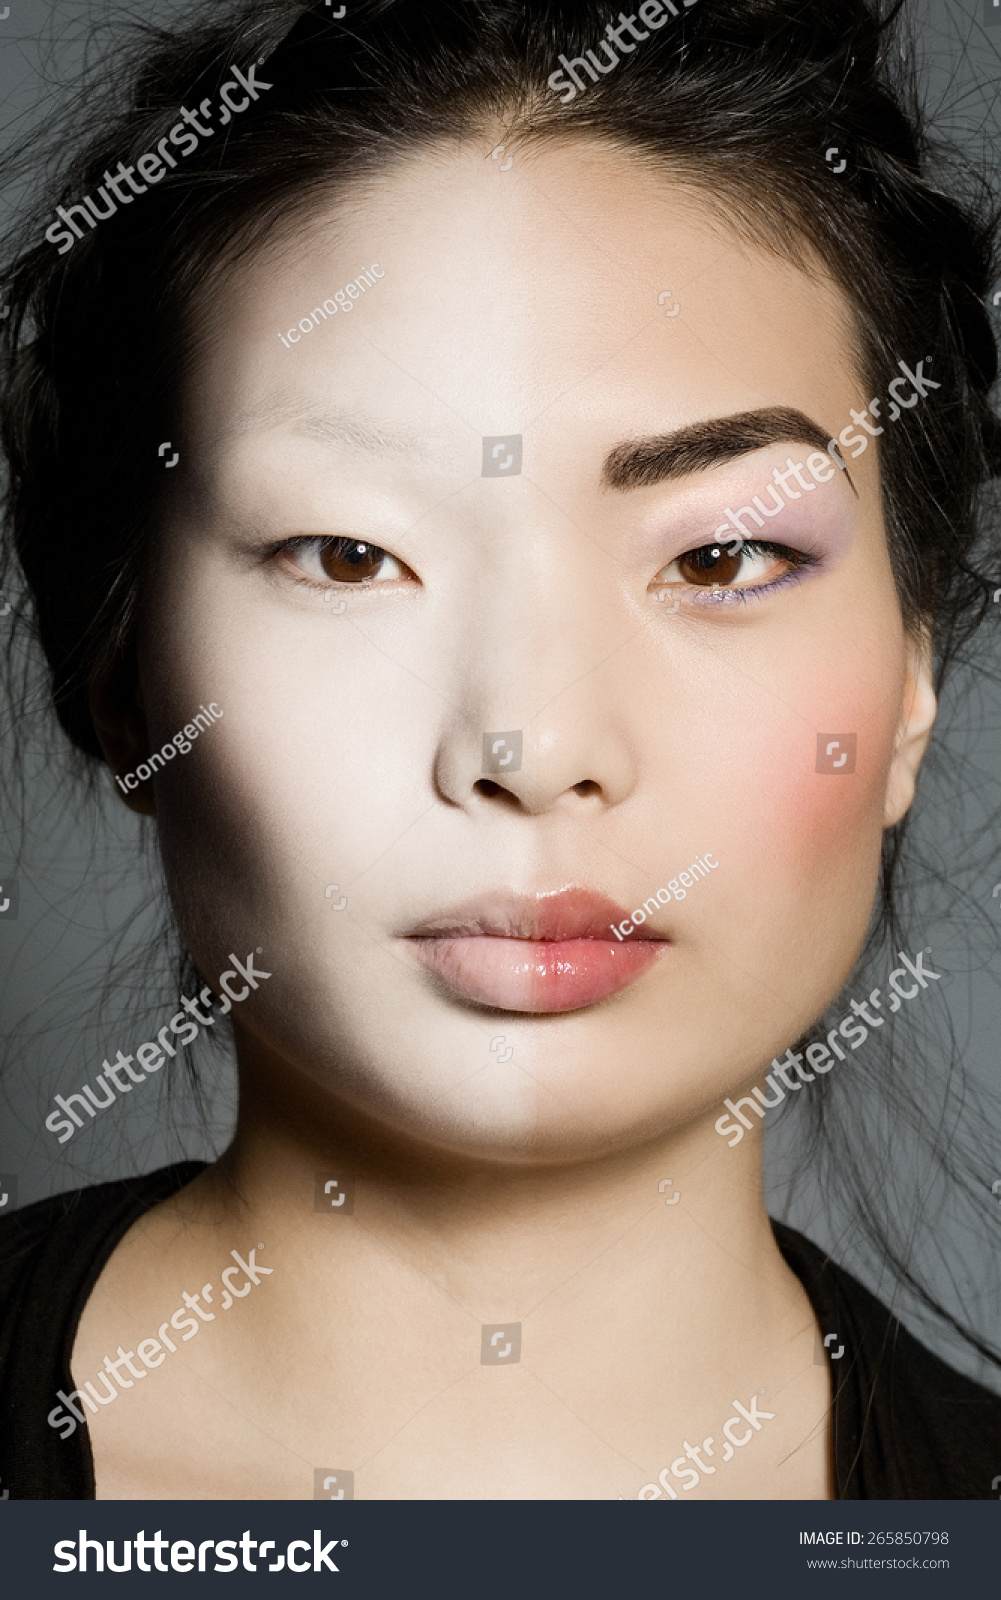 Model with one half of her face pale, and another half made up. - stock-photo-model-with-one-half-of-her-face-pale-and-another-half-made-up-265850798